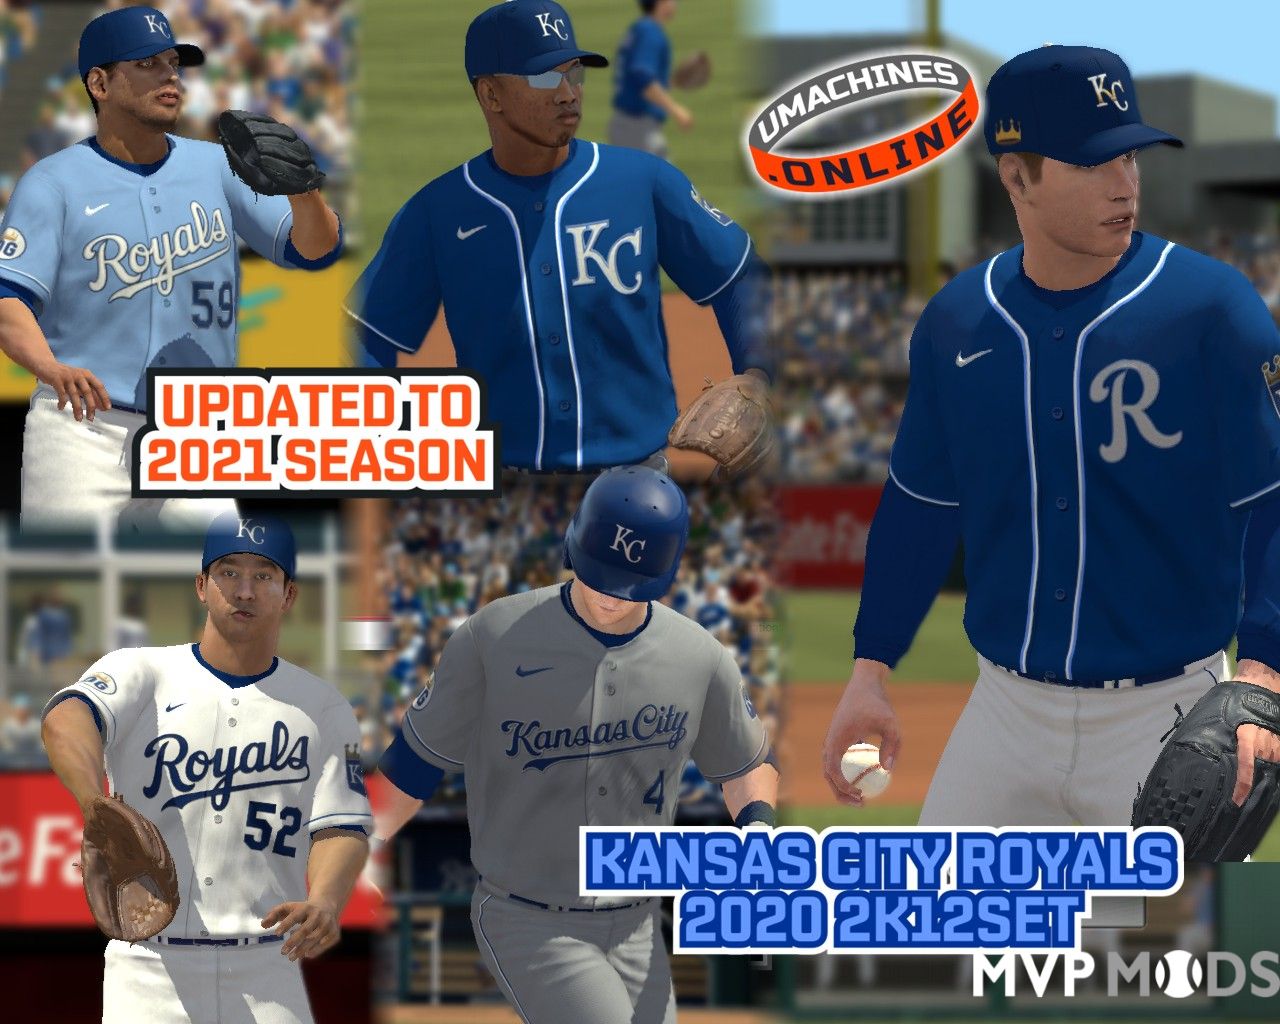 Kansas City Royals 2012 Uniforms, Uniforms to be worn for t…